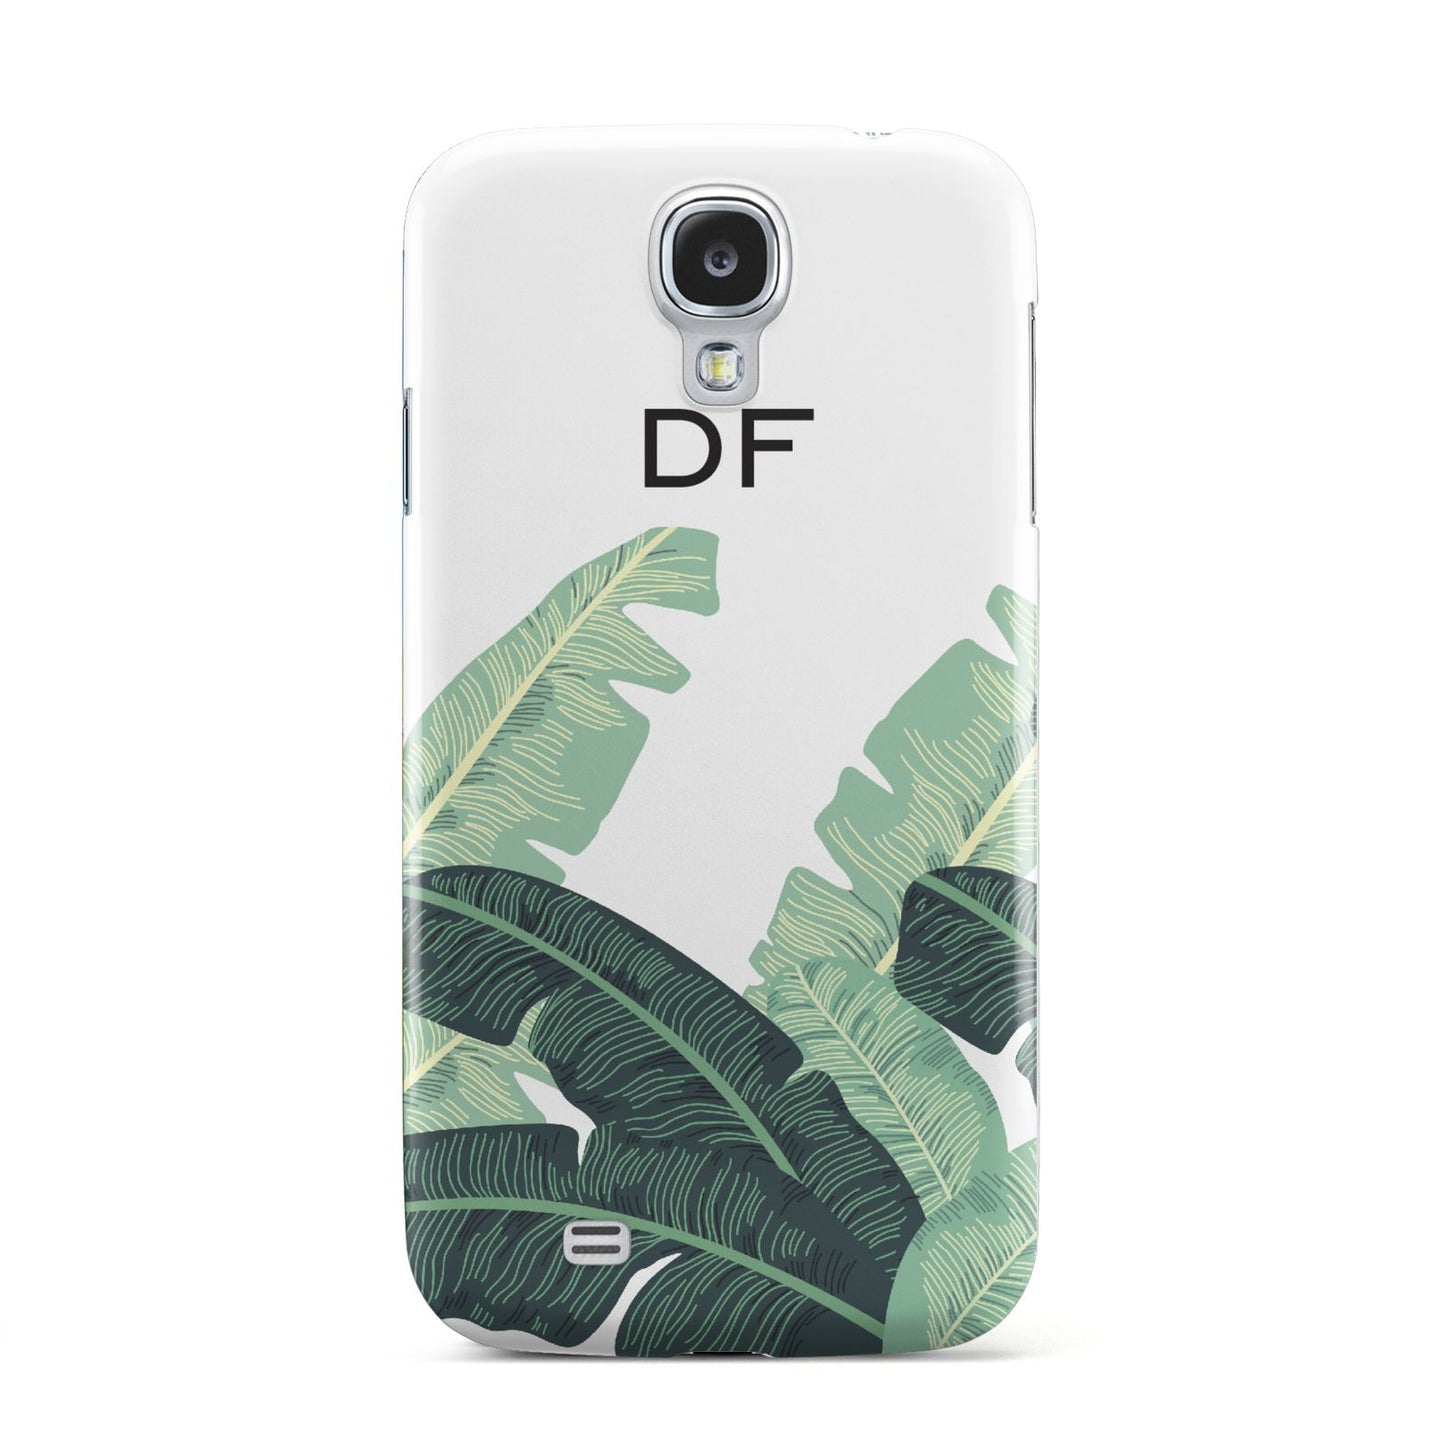 Personalised White Banana Leaf Samsung Galaxy S4 Case